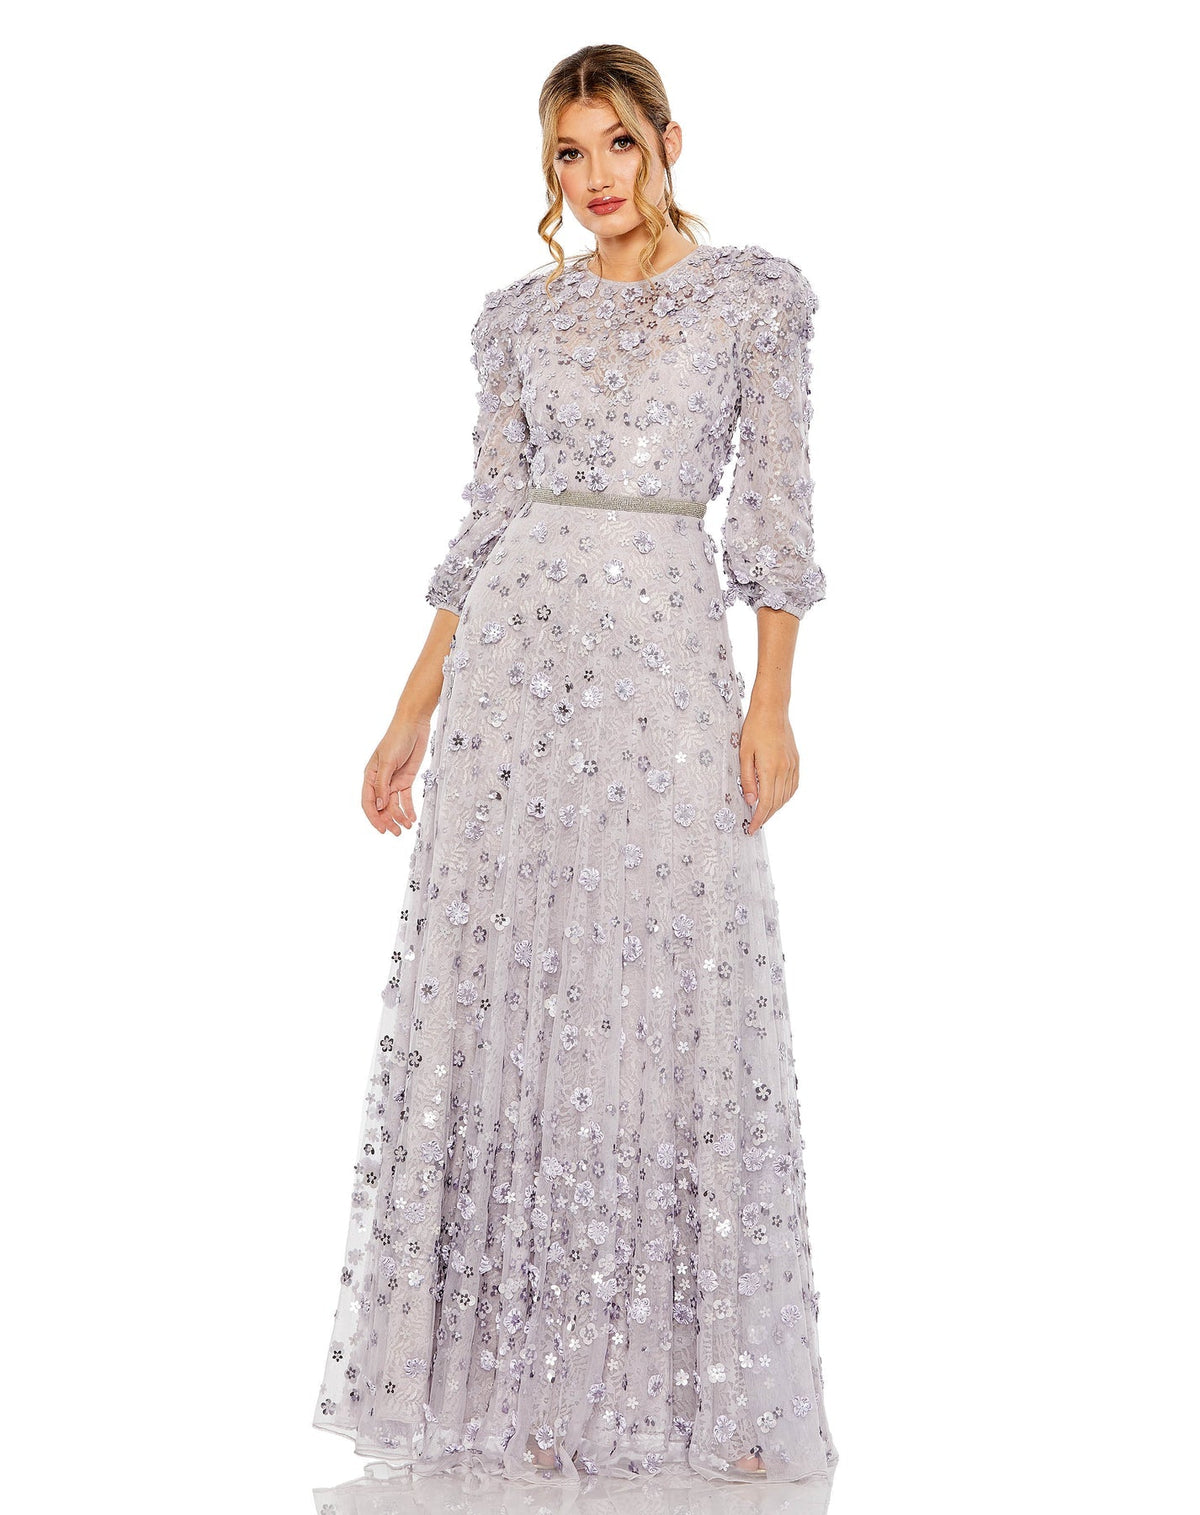 mac duggal, FLORAL APPLIQUE PUFF SLEEVE HIGH NECK A-LINE modest GOWN, Style #93805, platinum